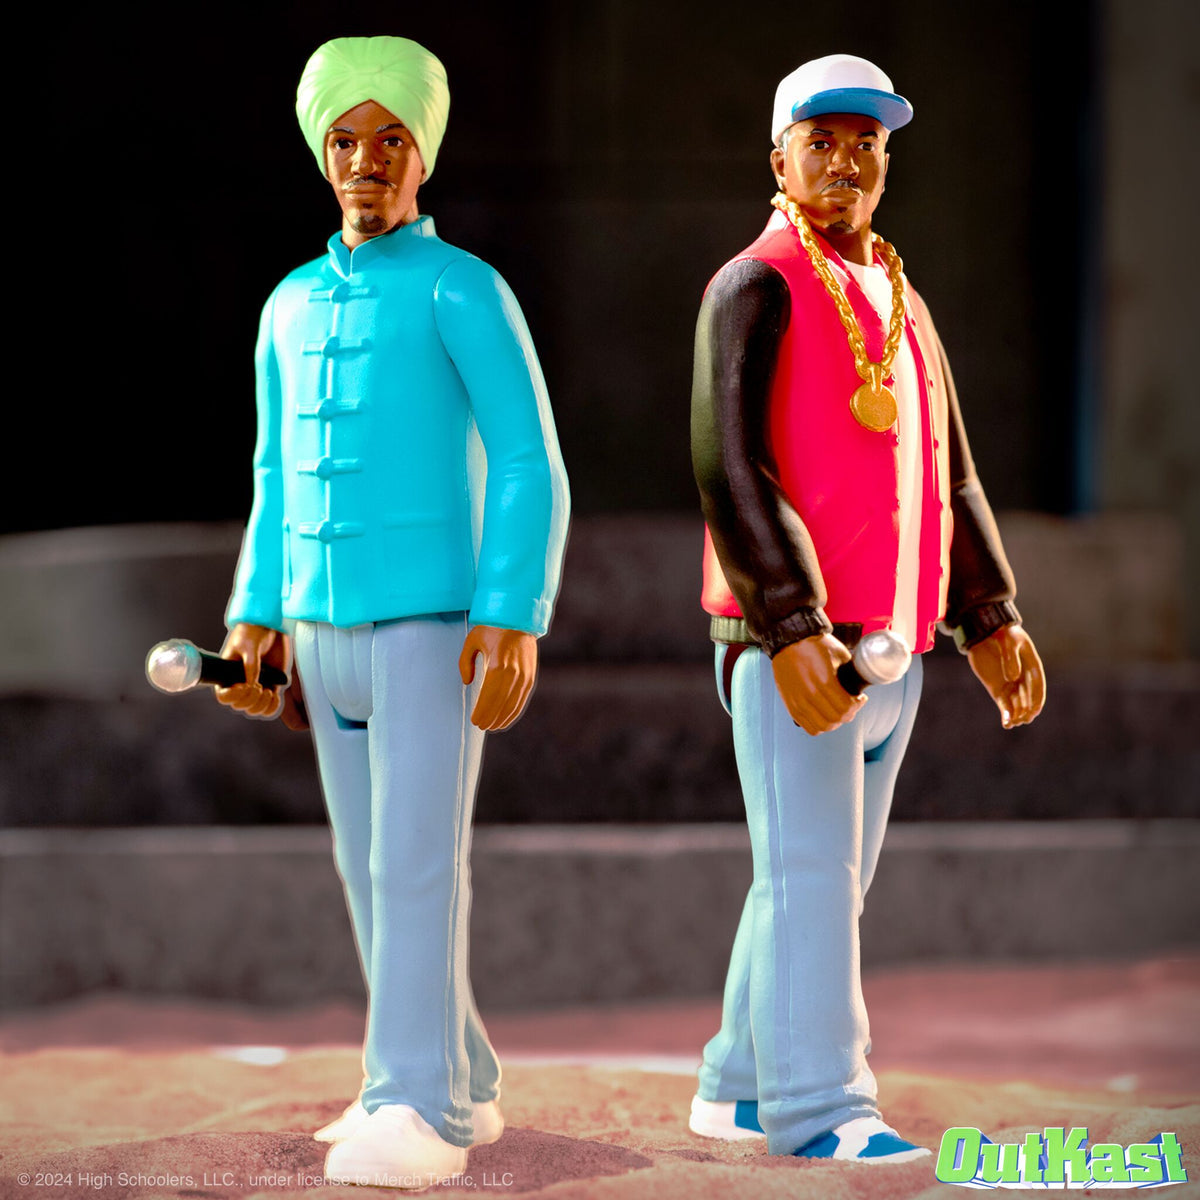 OutKast (ATLiens) - OutKast by Super7